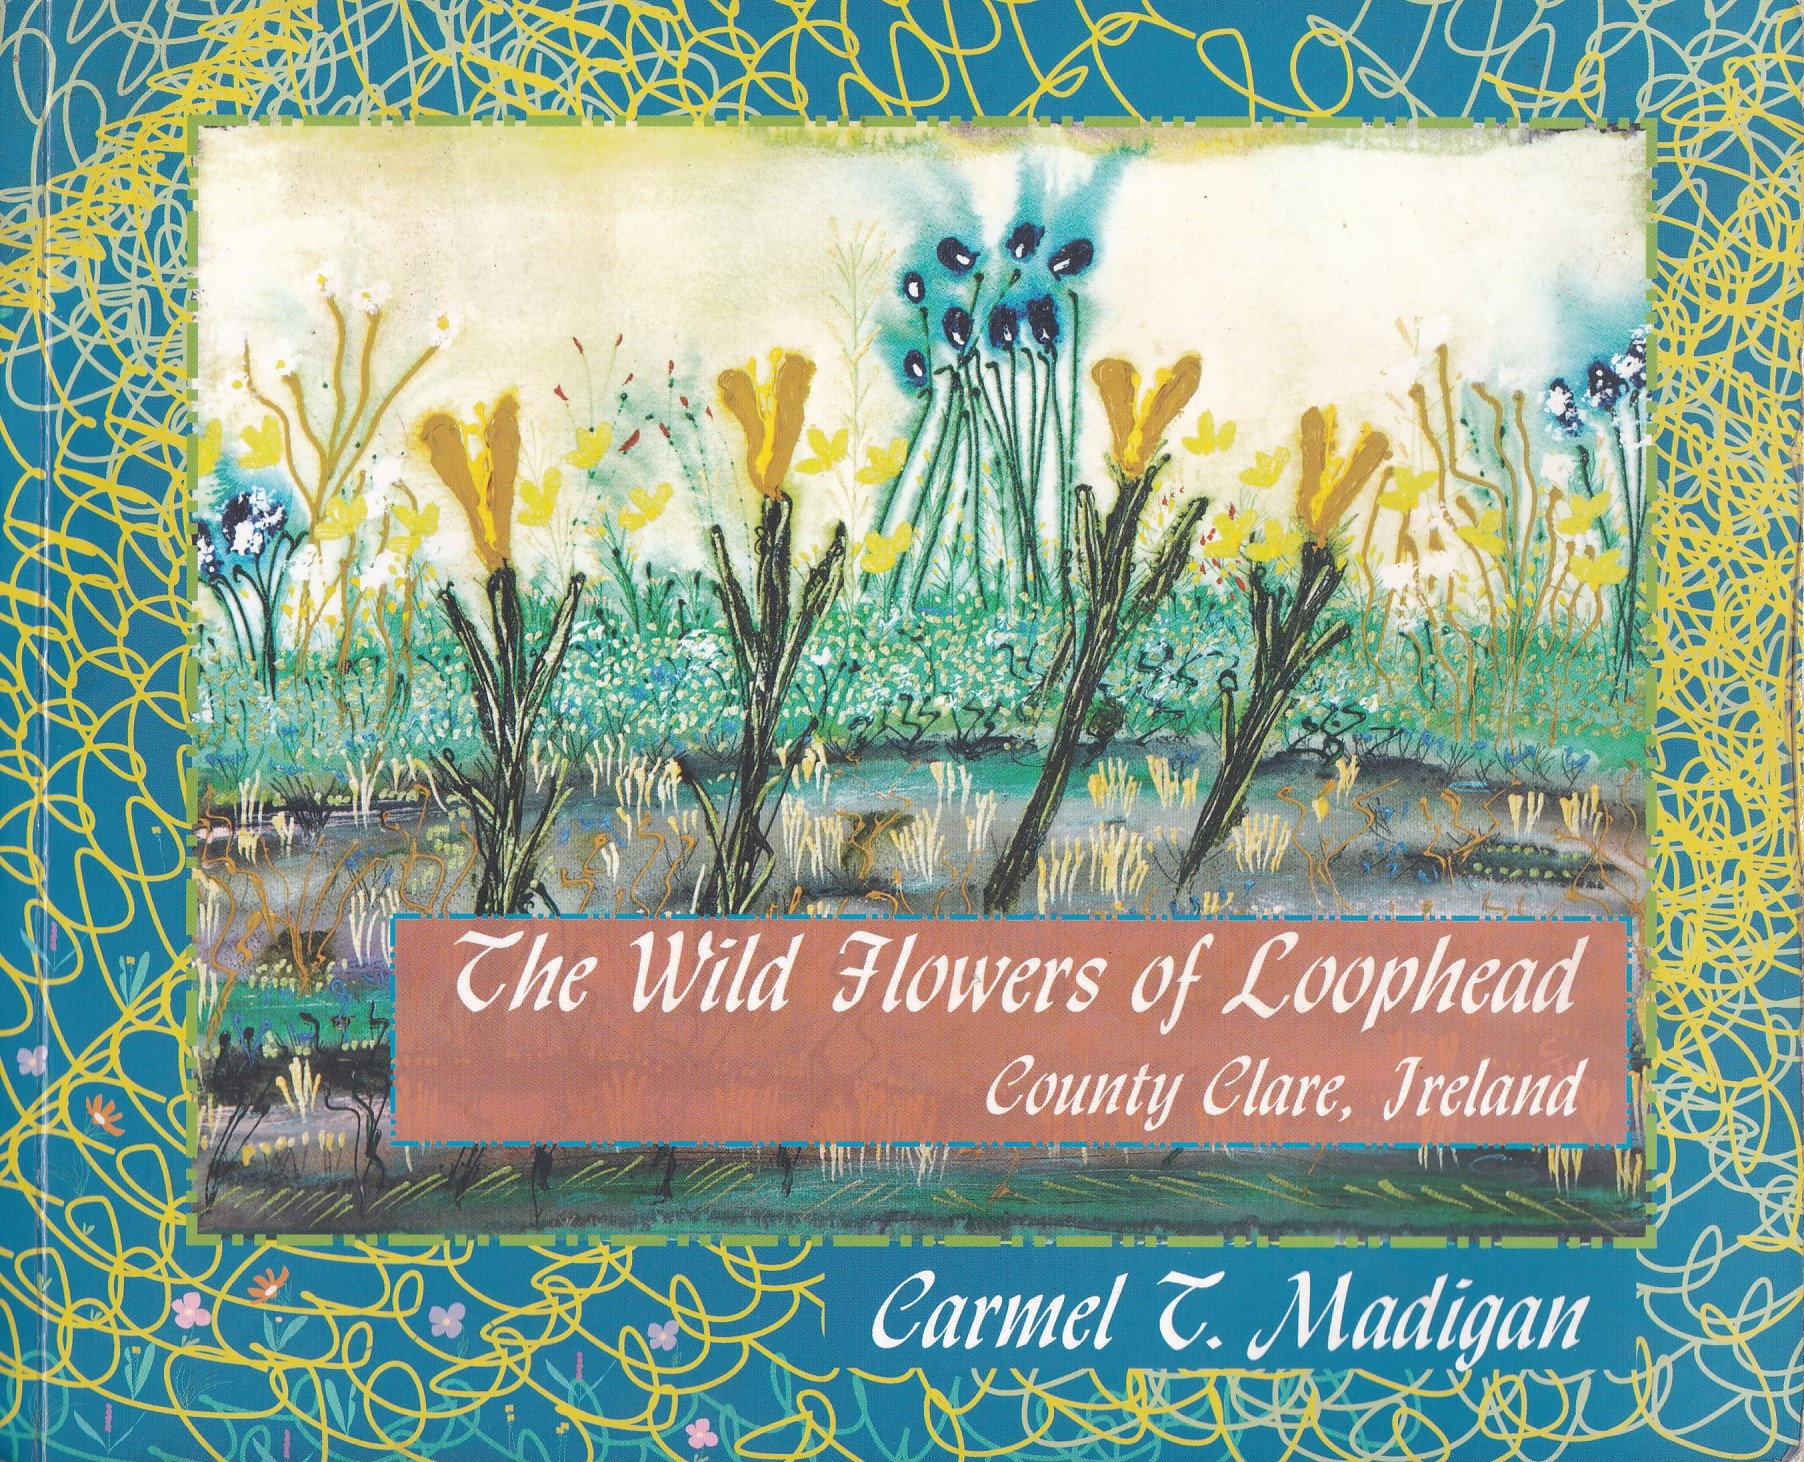 The Wild Flowers of Loop Head, County Clare, Ireland | Carmel T. Madigan | Charlie Byrne's